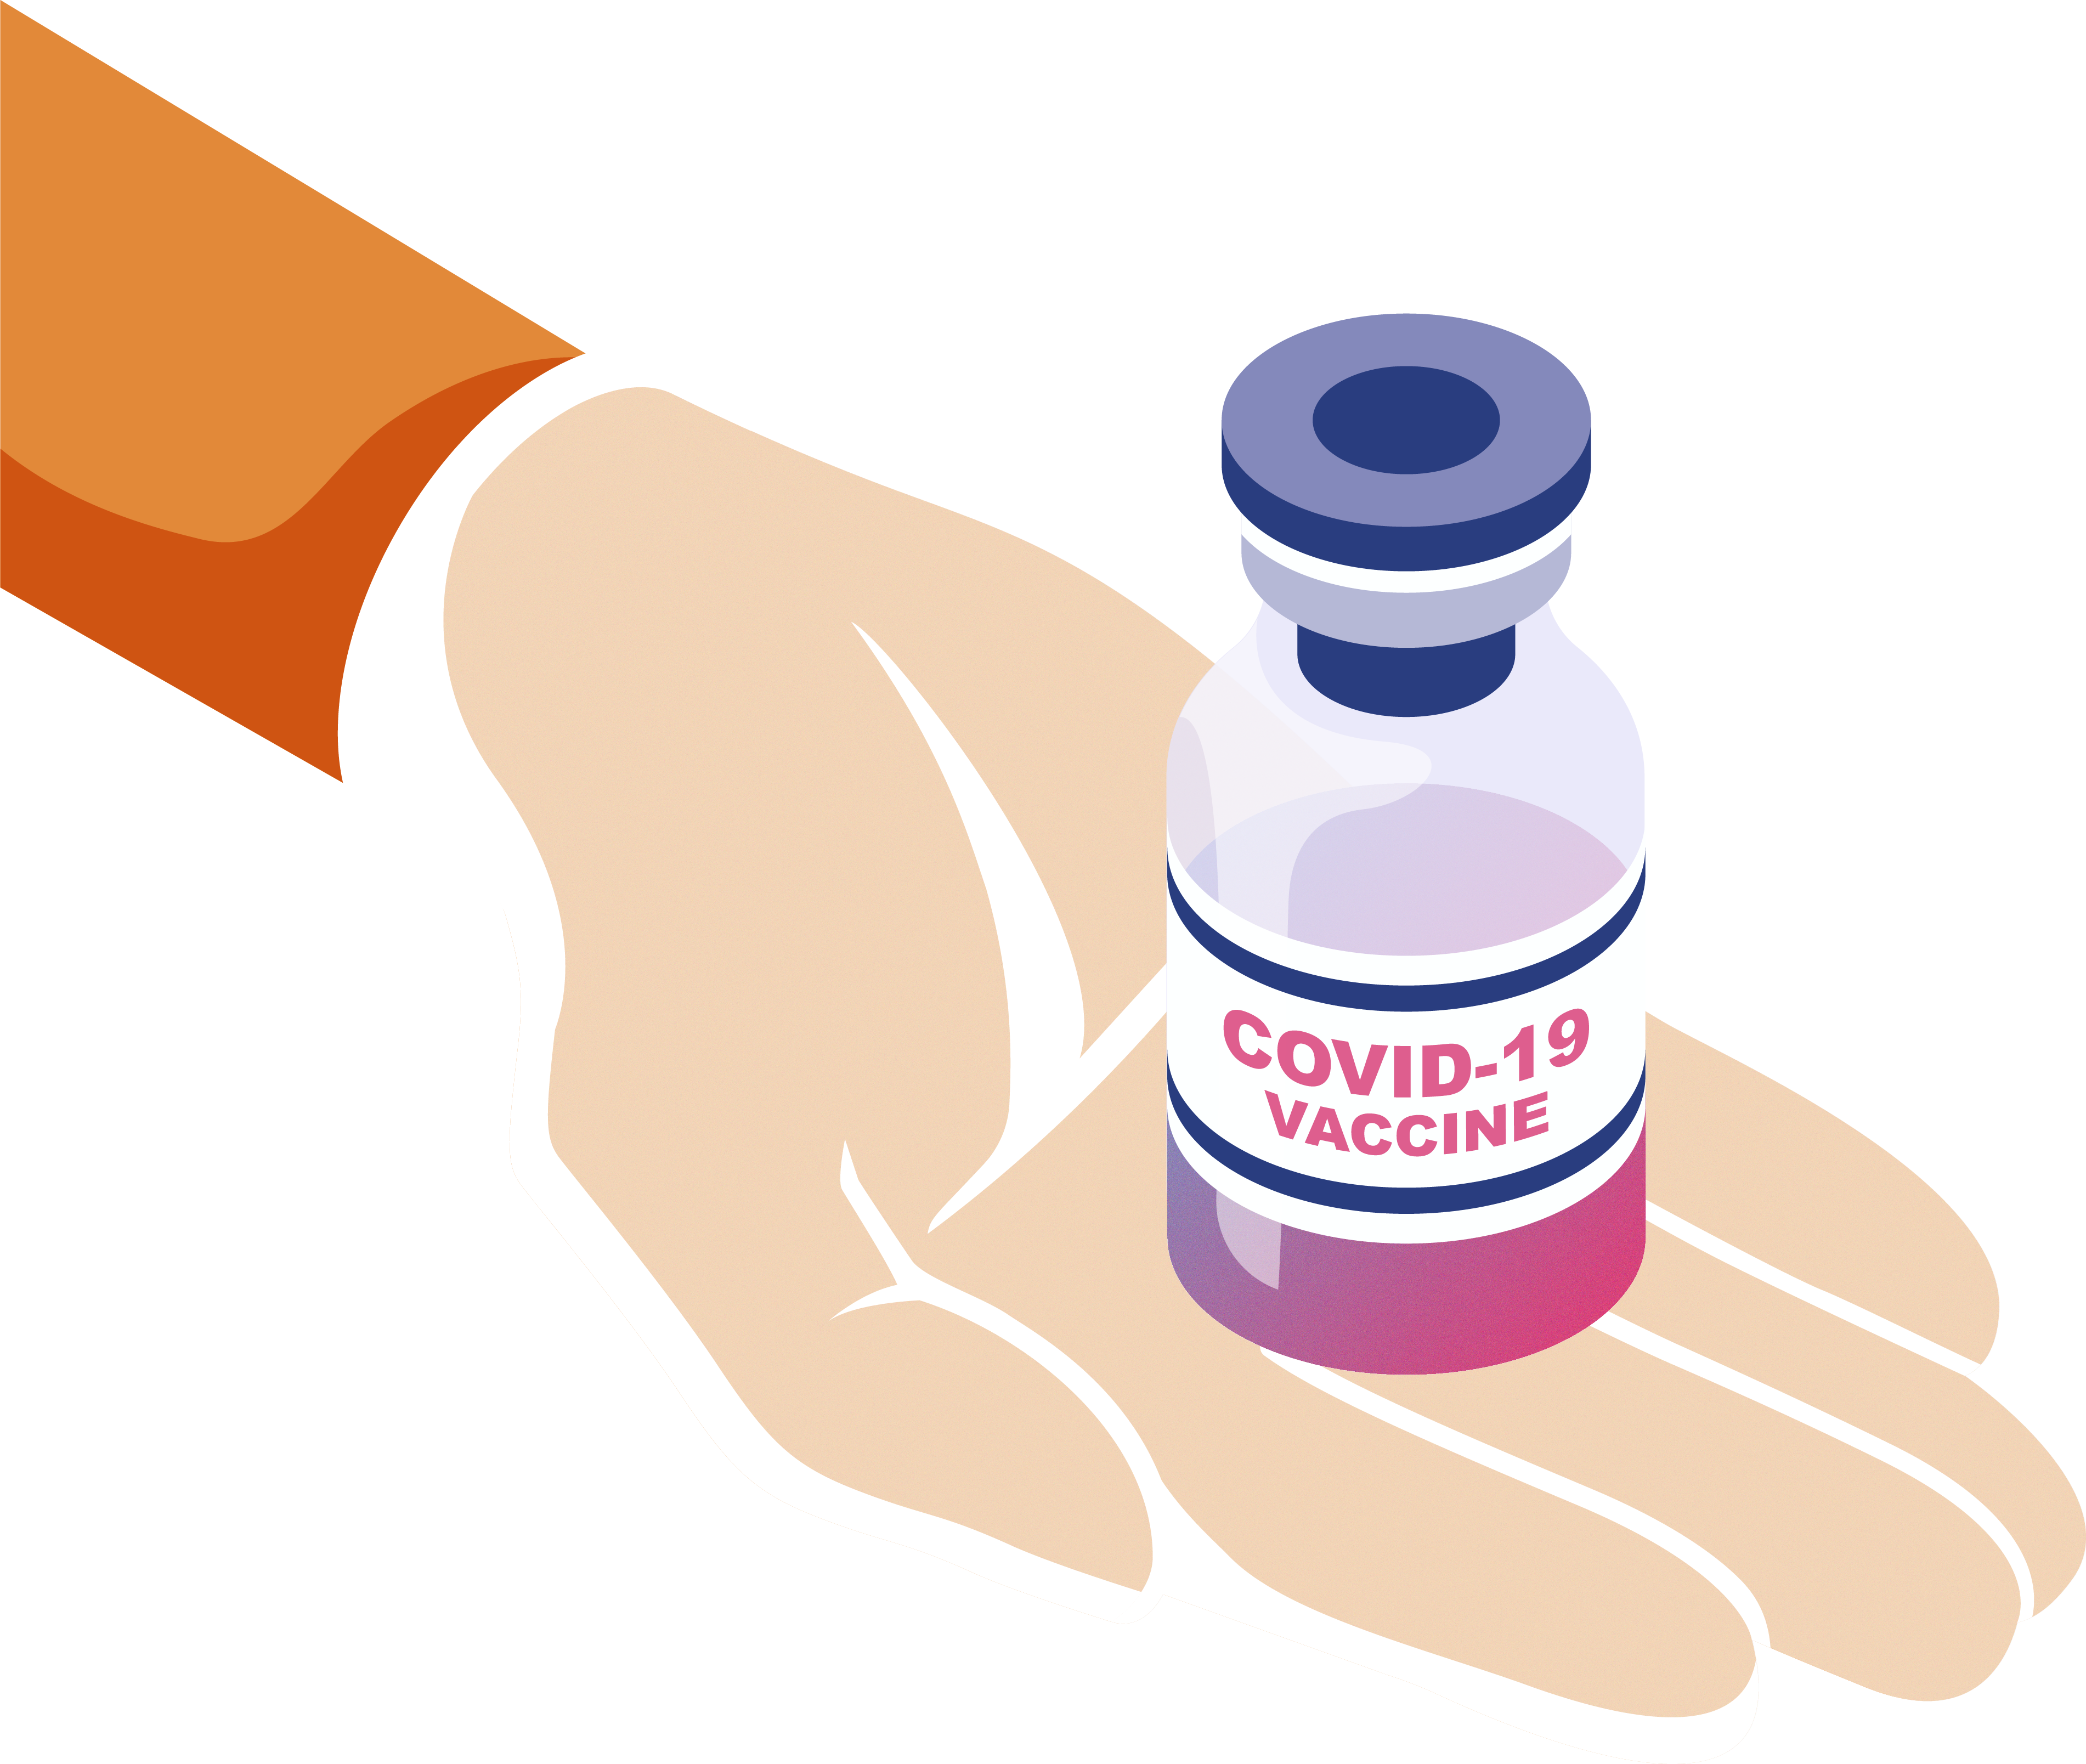 Illustration of a hand holding a COVID-19 vaccination vial